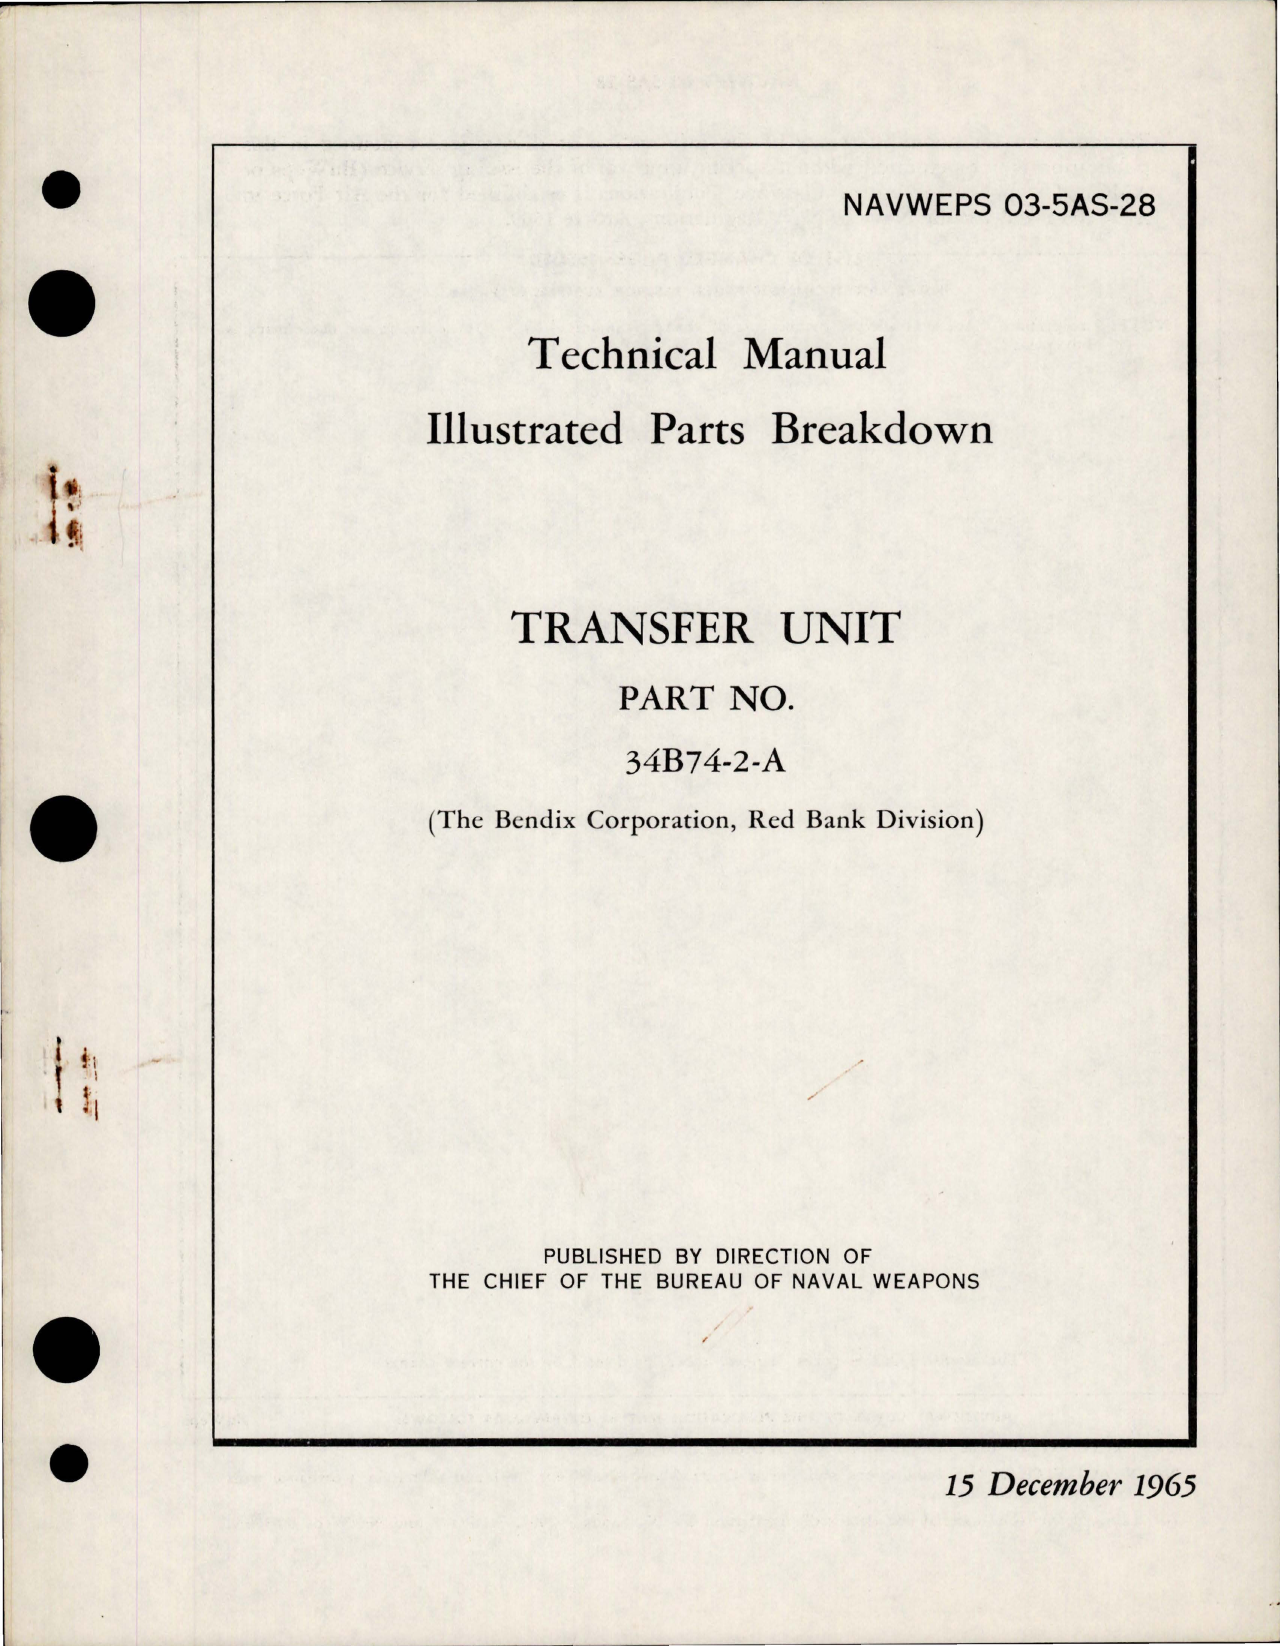 Sample page 1 from AirCorps Library document: Illustrated Parts Breakdown for Transfer Unit - Part 34B74-2-A 